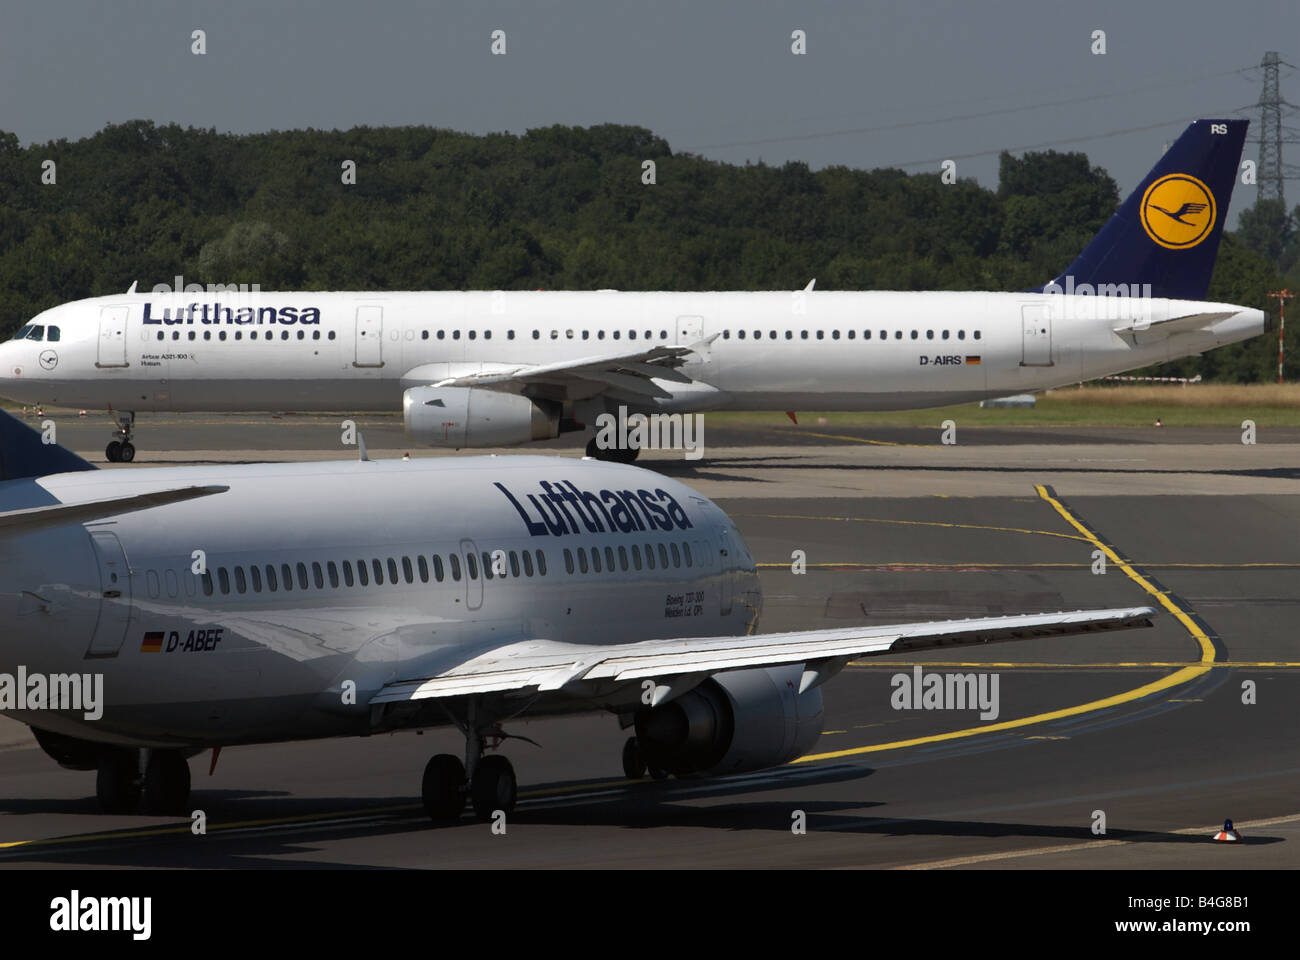 Lufthansa Boeing 737-300 and Airbus A321-100 taxiing to the runway, Dusseldorf International Airport, Germany. Stock Photo